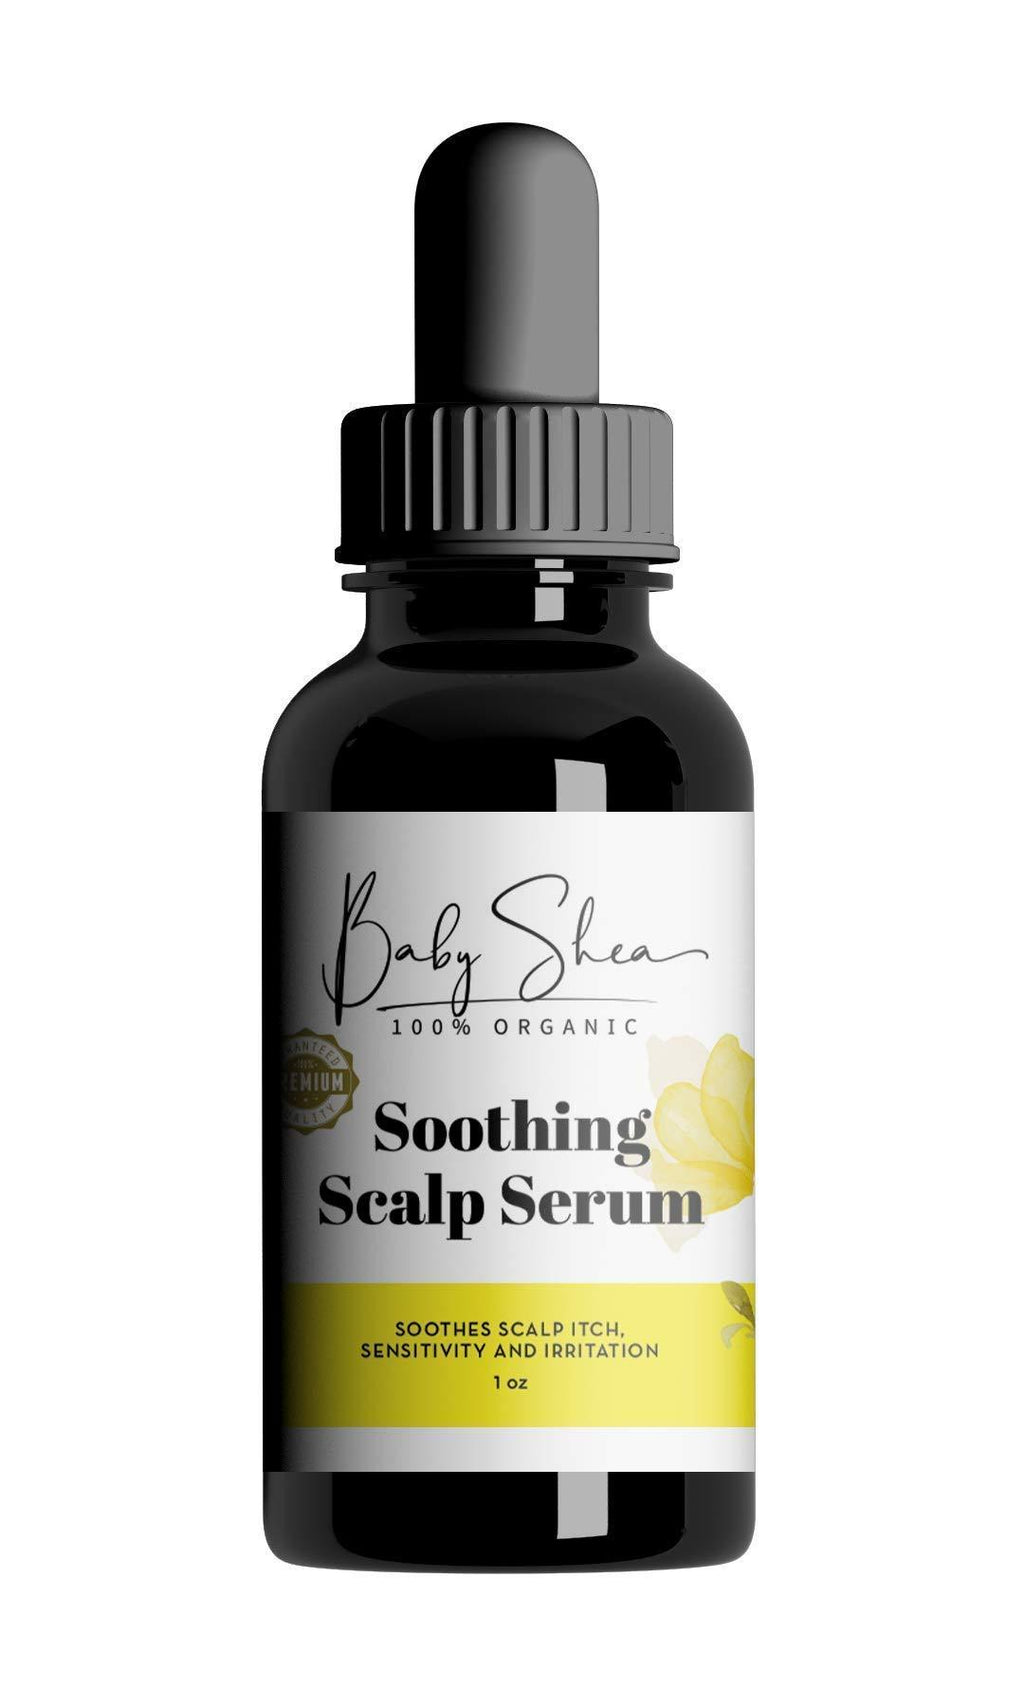 Baby Shea 100% Organic Soothing Scalp Serum, Intensive Hydration Itch Relief, Dry Scalp & Baby Scalp Eczema Relief, with Vitamin E Oil, Jojoba Oil, TeaTree, Colloidal Oatmeal 1oz